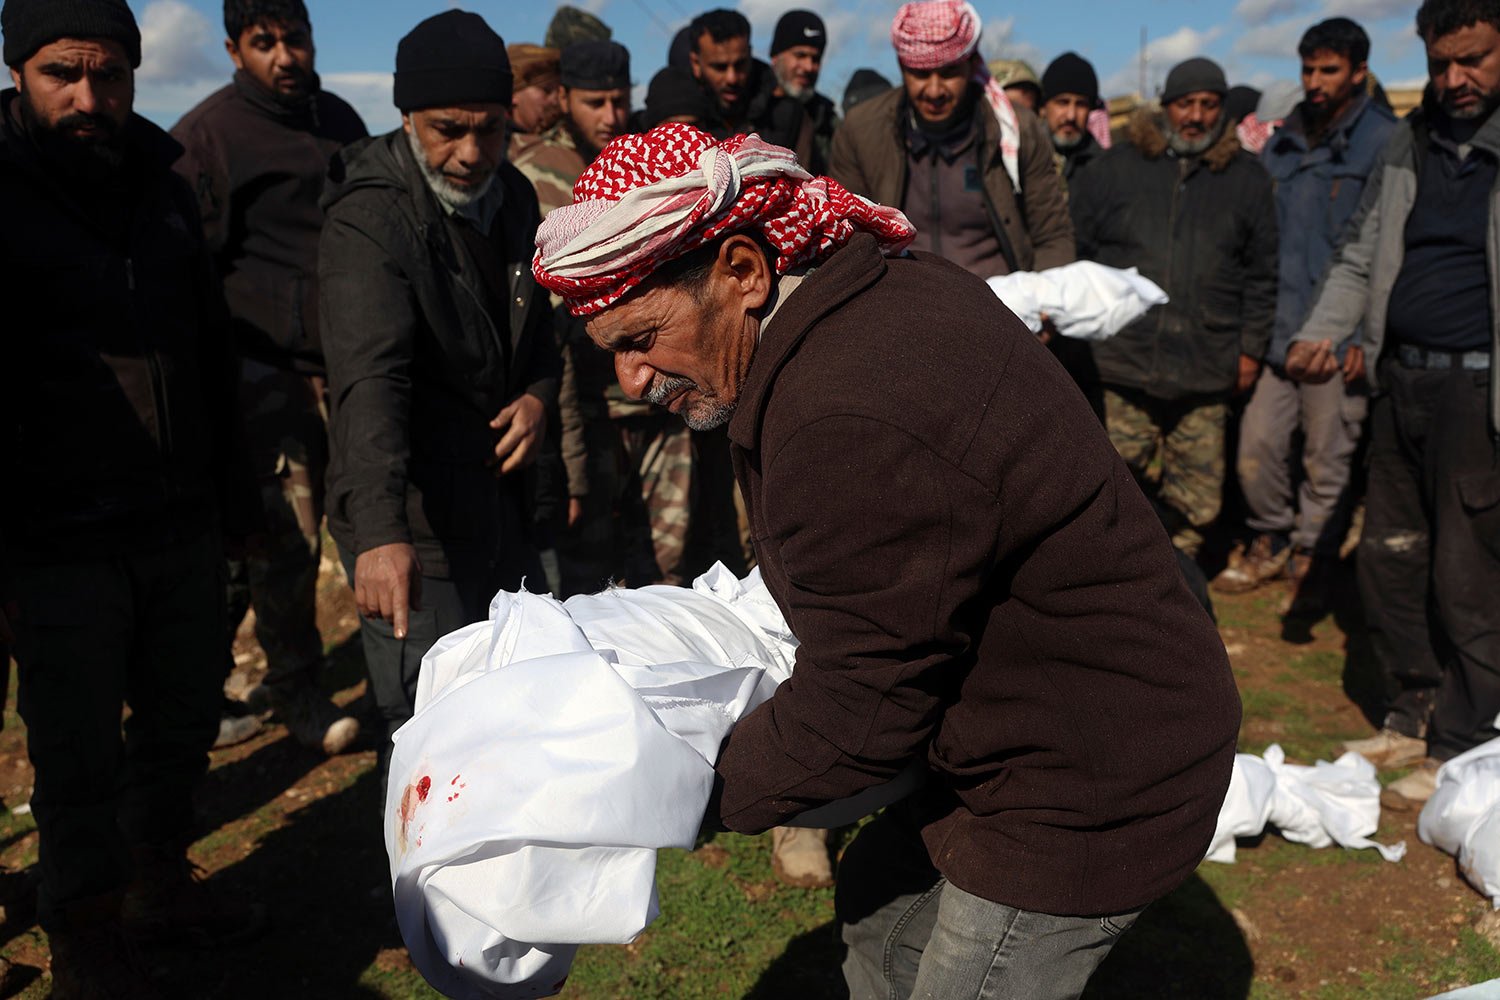  Mourners bury family members who died in a devastating earthquake that rocked Syria and Turkey at a cemetery in the town of Jinderis, Aleppo province, Syria, Tuesday, Feb. 7, 2023. (AP Photo/Ghaith Alsayed) 